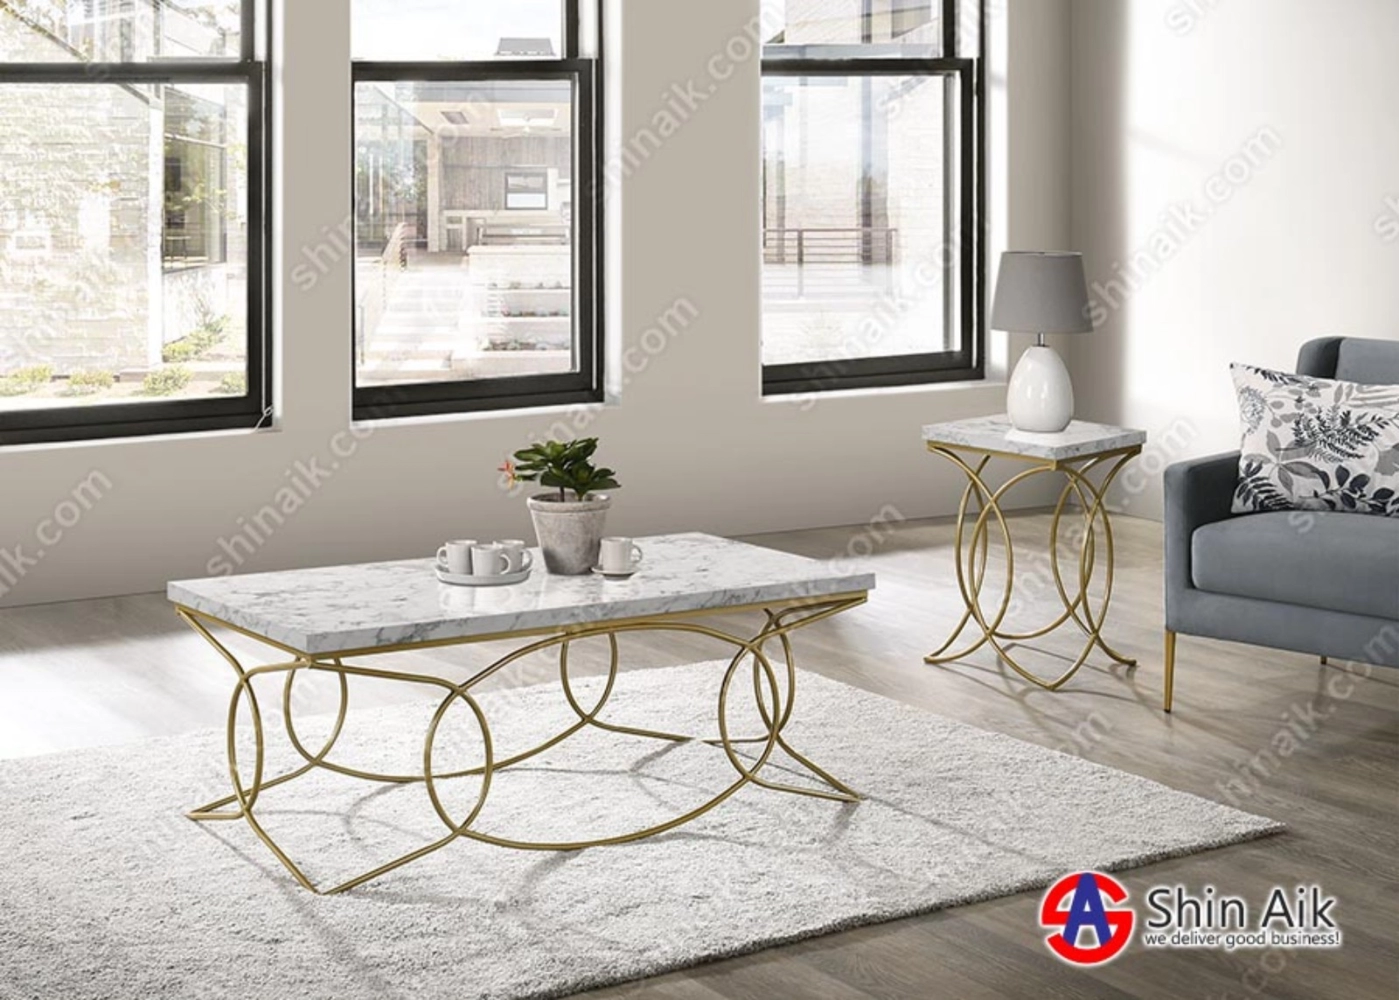 CT65066 (4'ft) White Marble & Gold Metal Elegant Style Rectangle Coffee Table